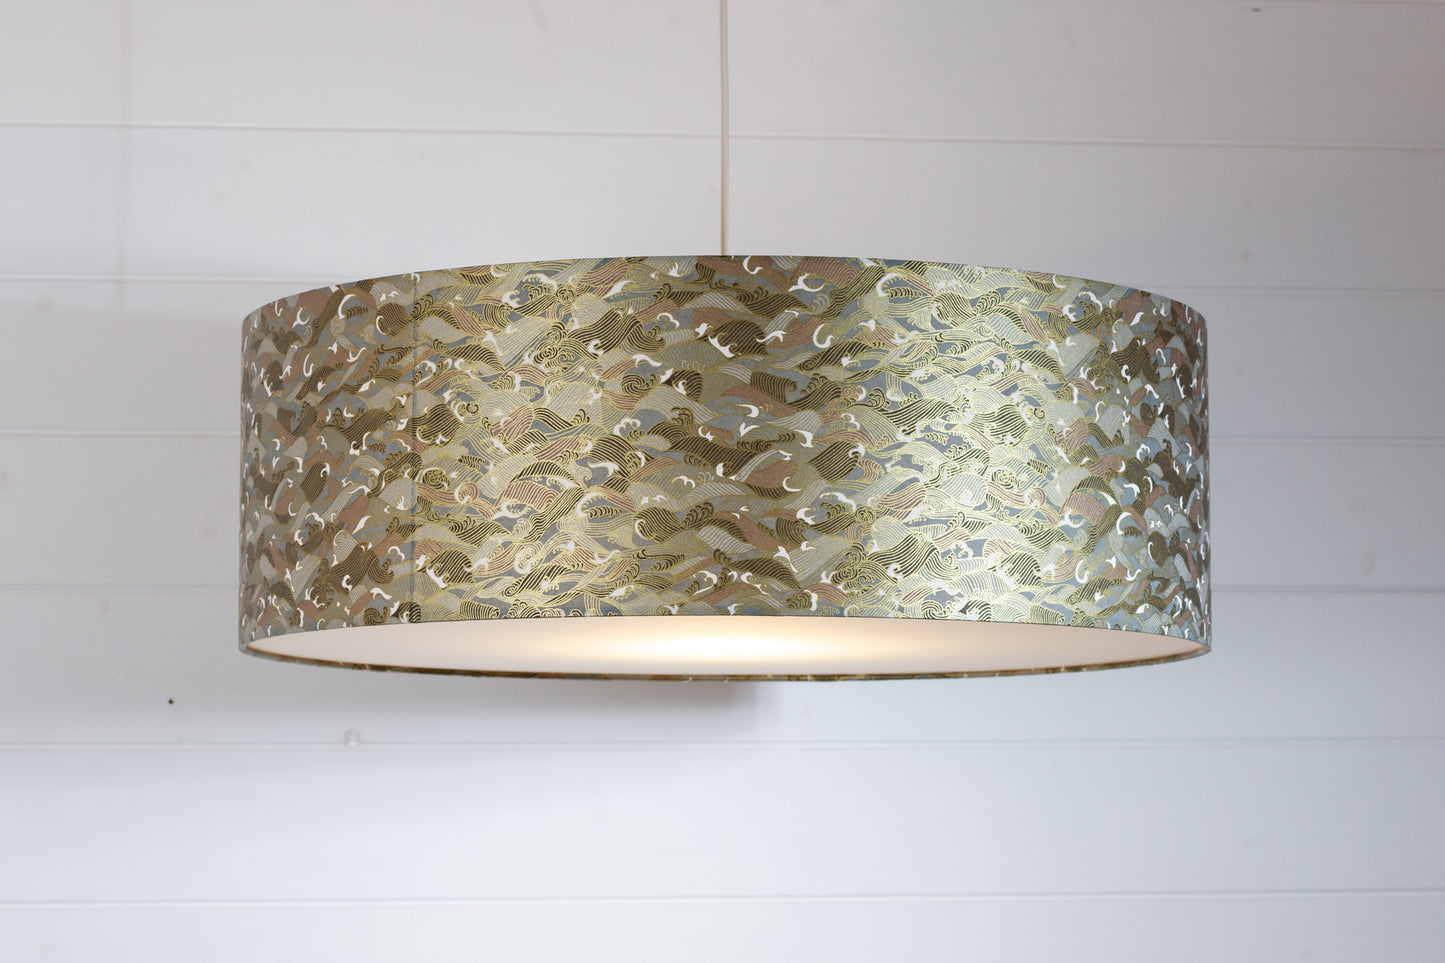 Drum Lamp Shade - W03 - Gold Waves on Greys, 60cm(d) x 20cm(h)